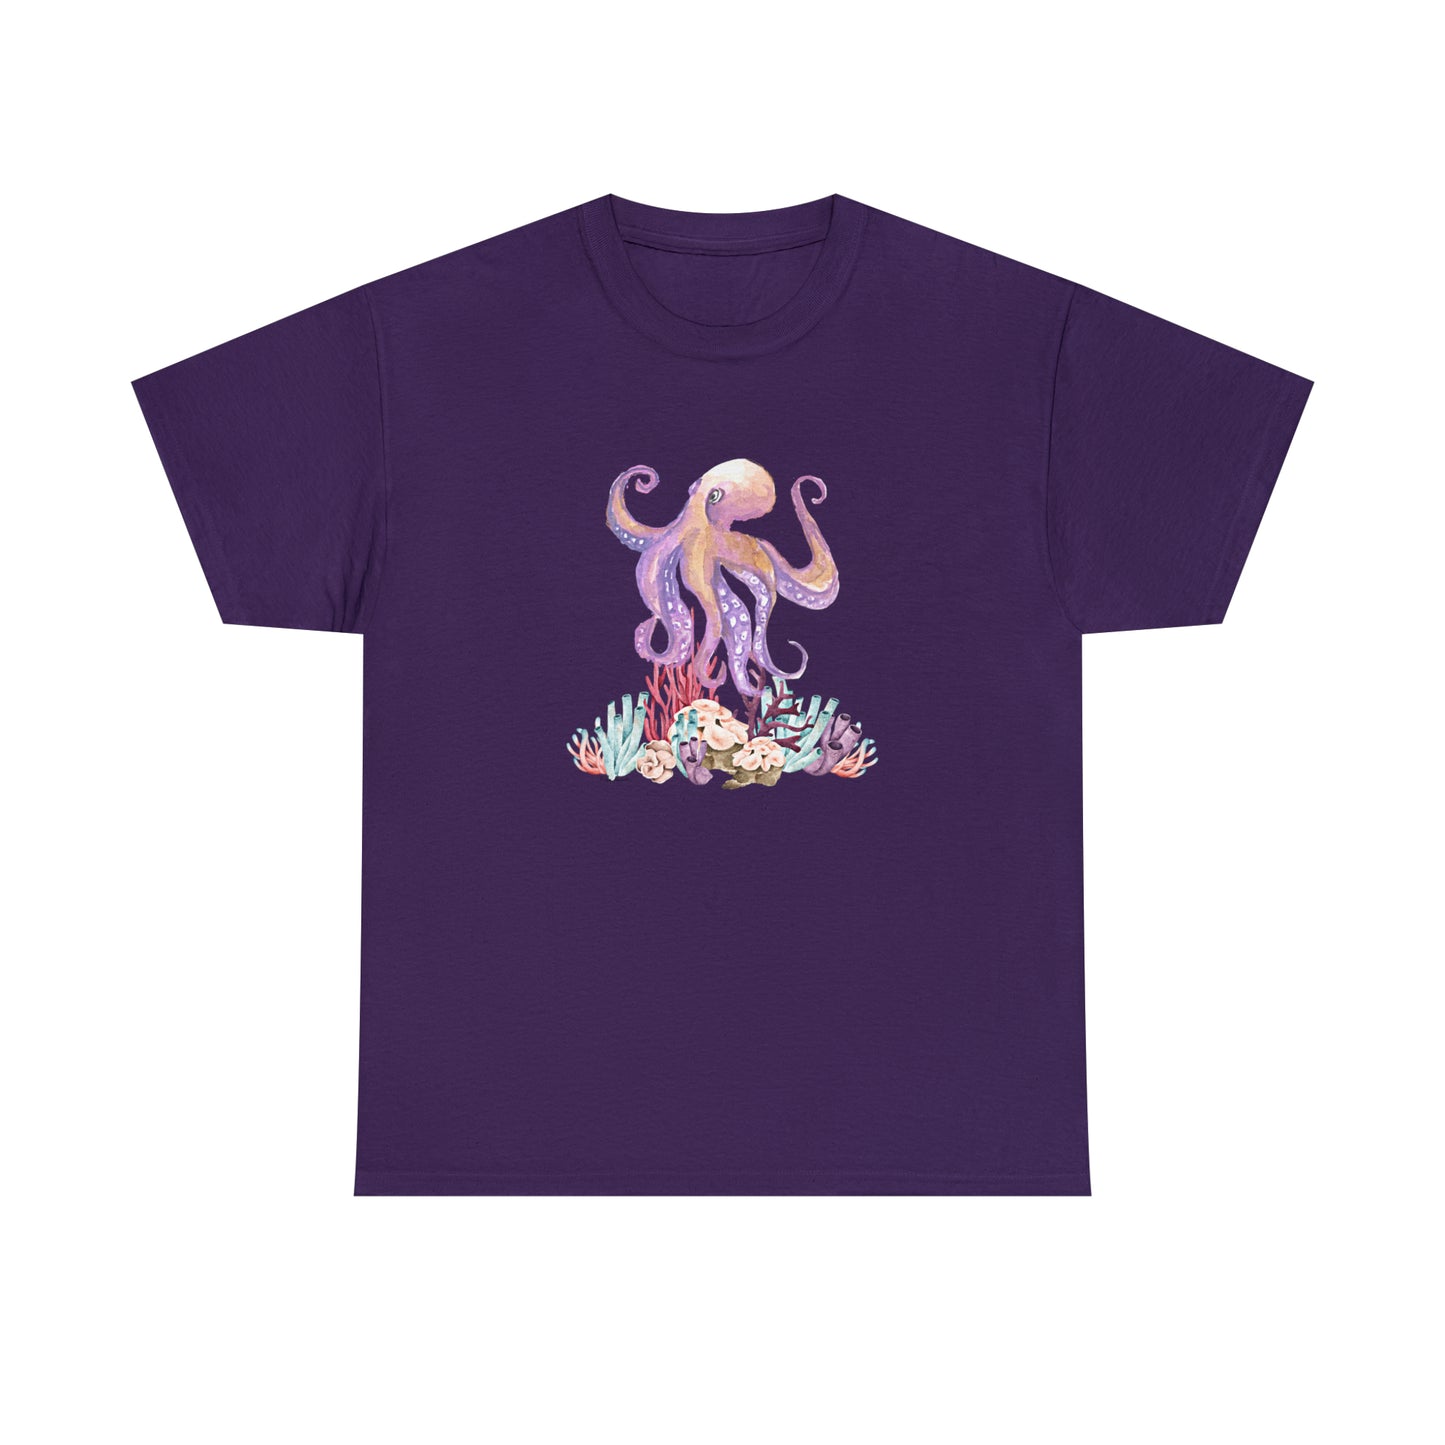 Flat front view of the Purple shirt